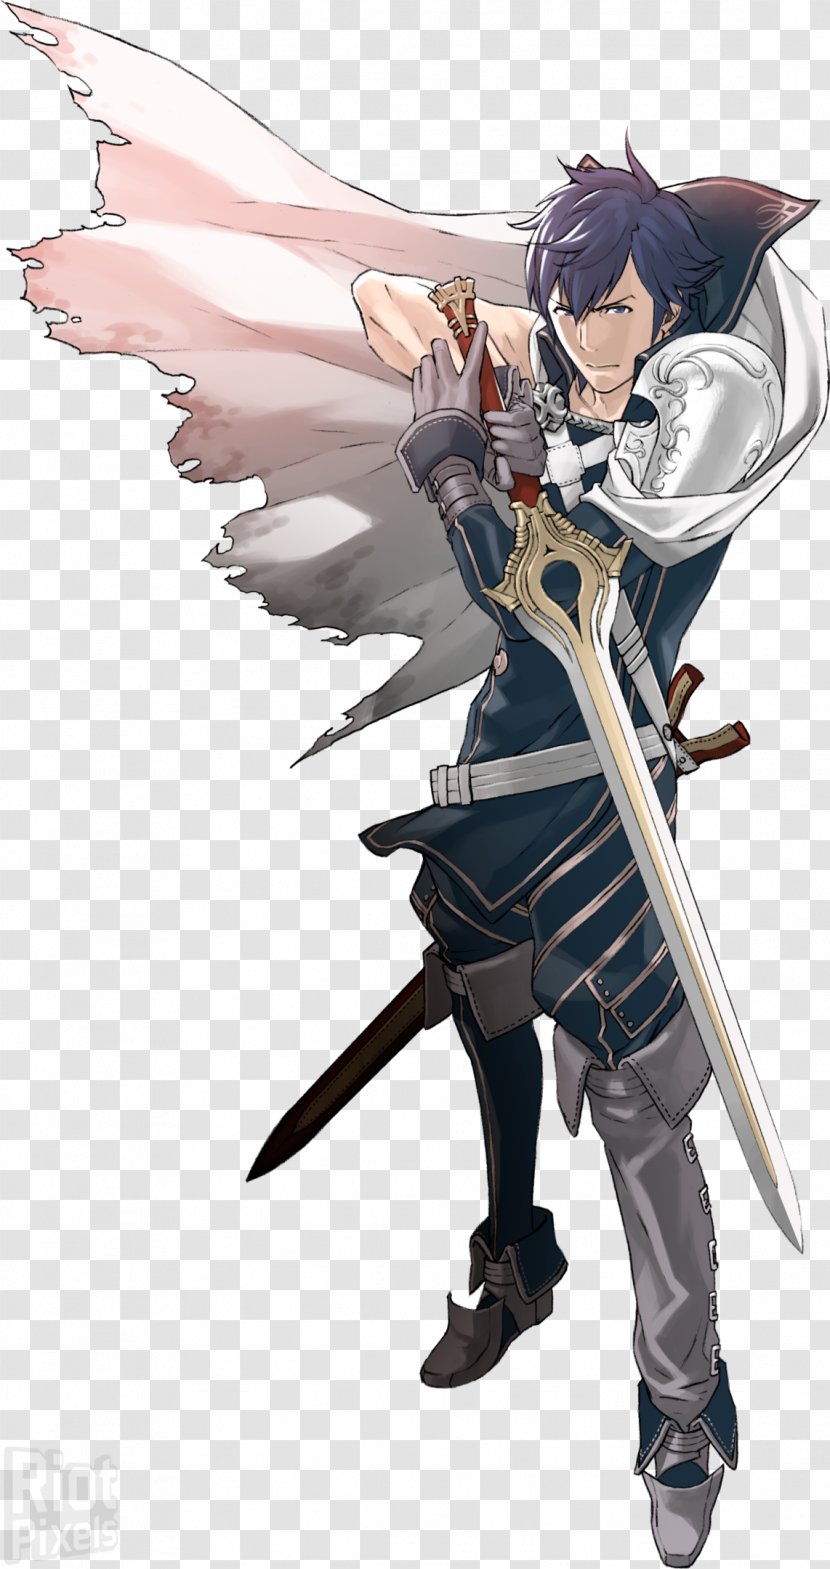 Fire Emblem Awakening Fates Super Smash Bros. For Nintendo 3DS And Wii U Emblem: Mystery Of The Shadow Dragon - Heart - Armour Transparent PNG